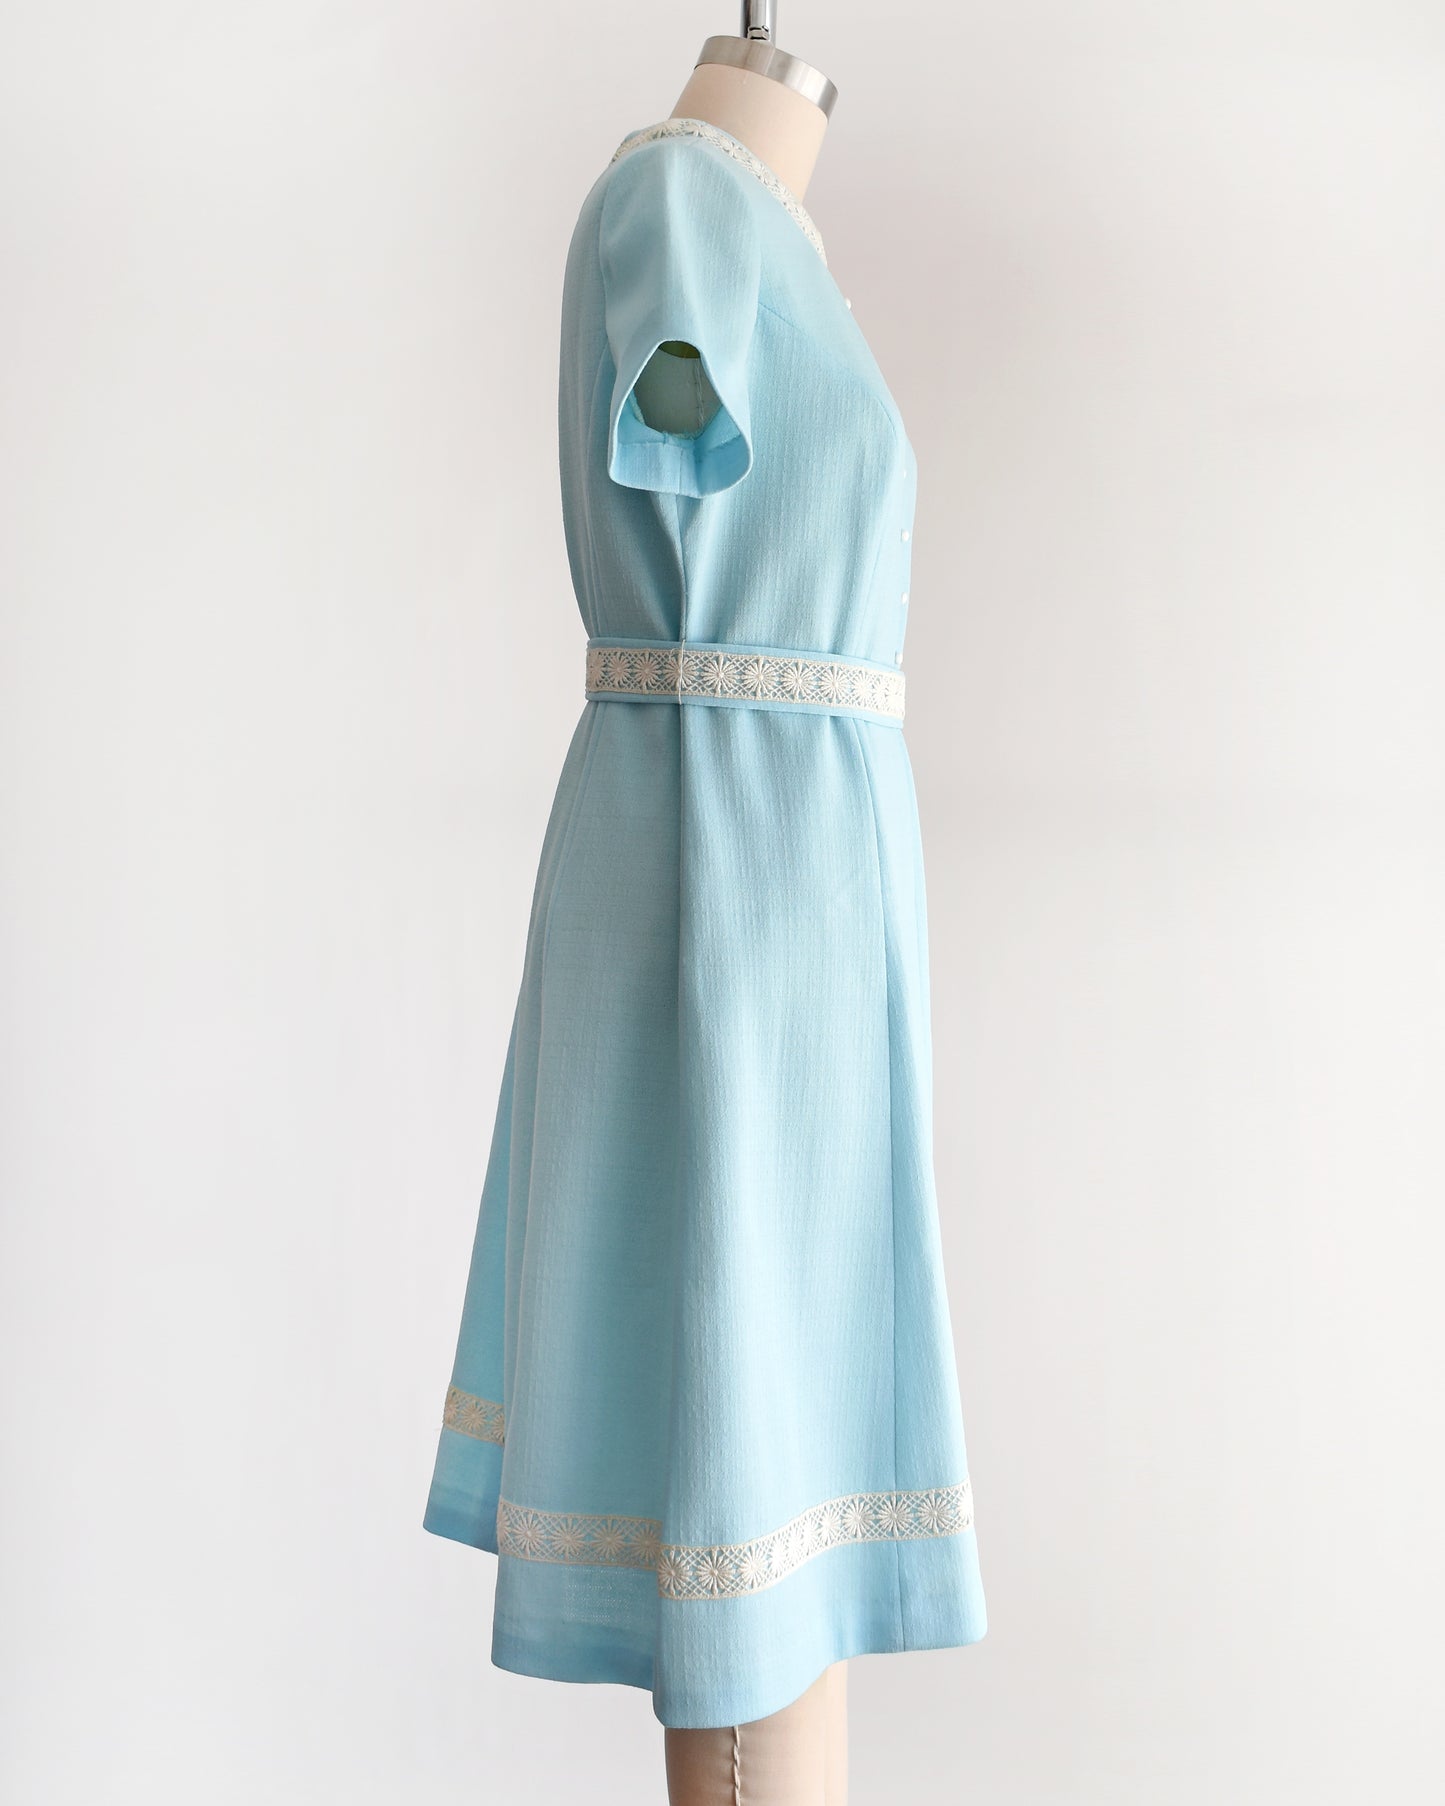 side view of a late 1960s early 1970s vintage mod dress that is light blue and has cream floral lace trim around the collar, belt, and hem